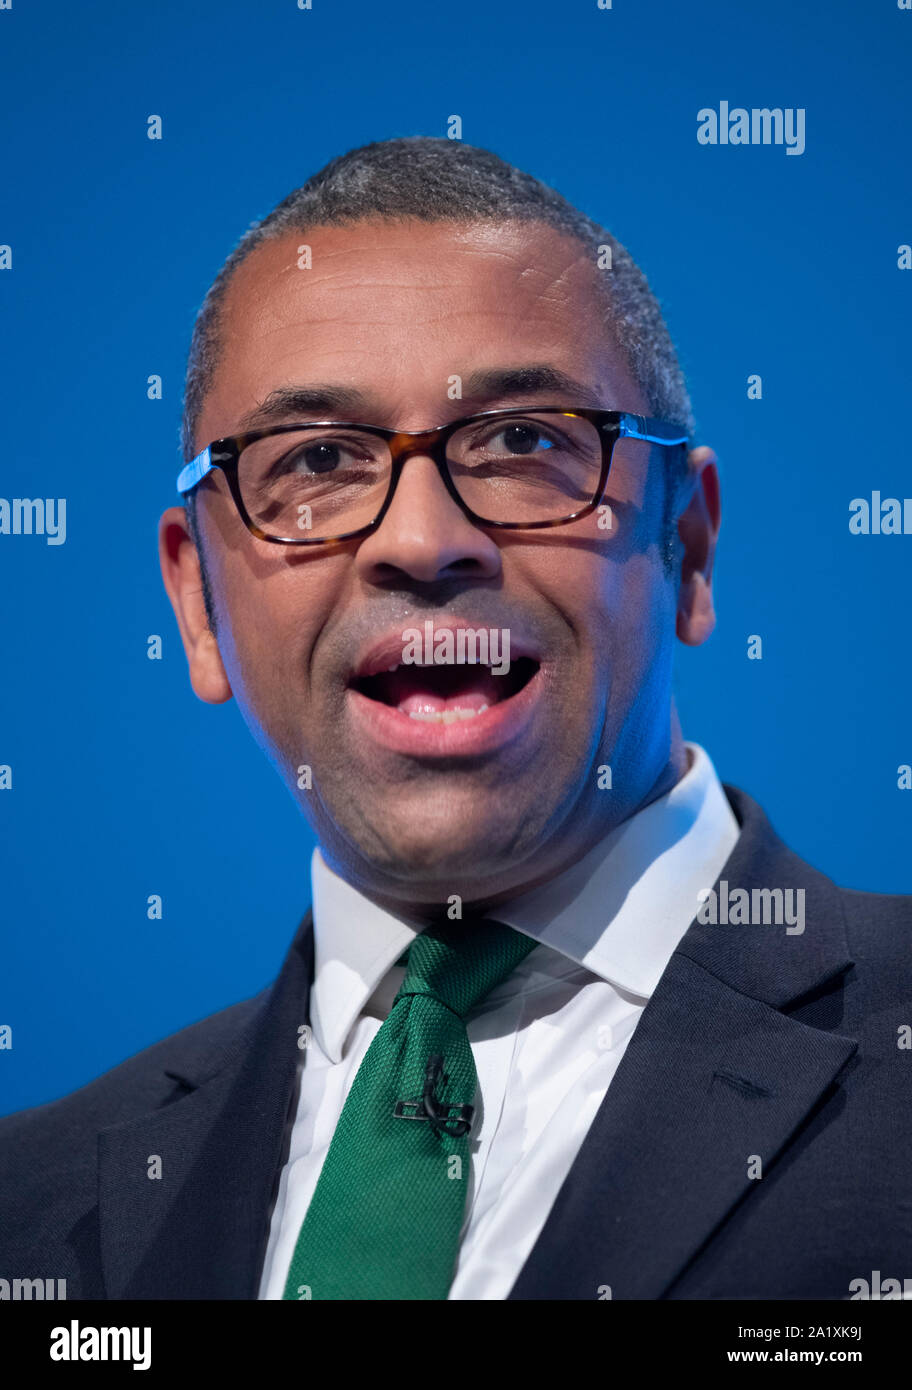 Manchester, UK. 29th September 2019. James Cleverly, Co-Chairman of the Conservative Party, Minister without Portfolio and MP for Braintree speaks at day one of the Conservative Party Conference in Manchester. © Russell Hart/Alamy Live News. Stock Photo